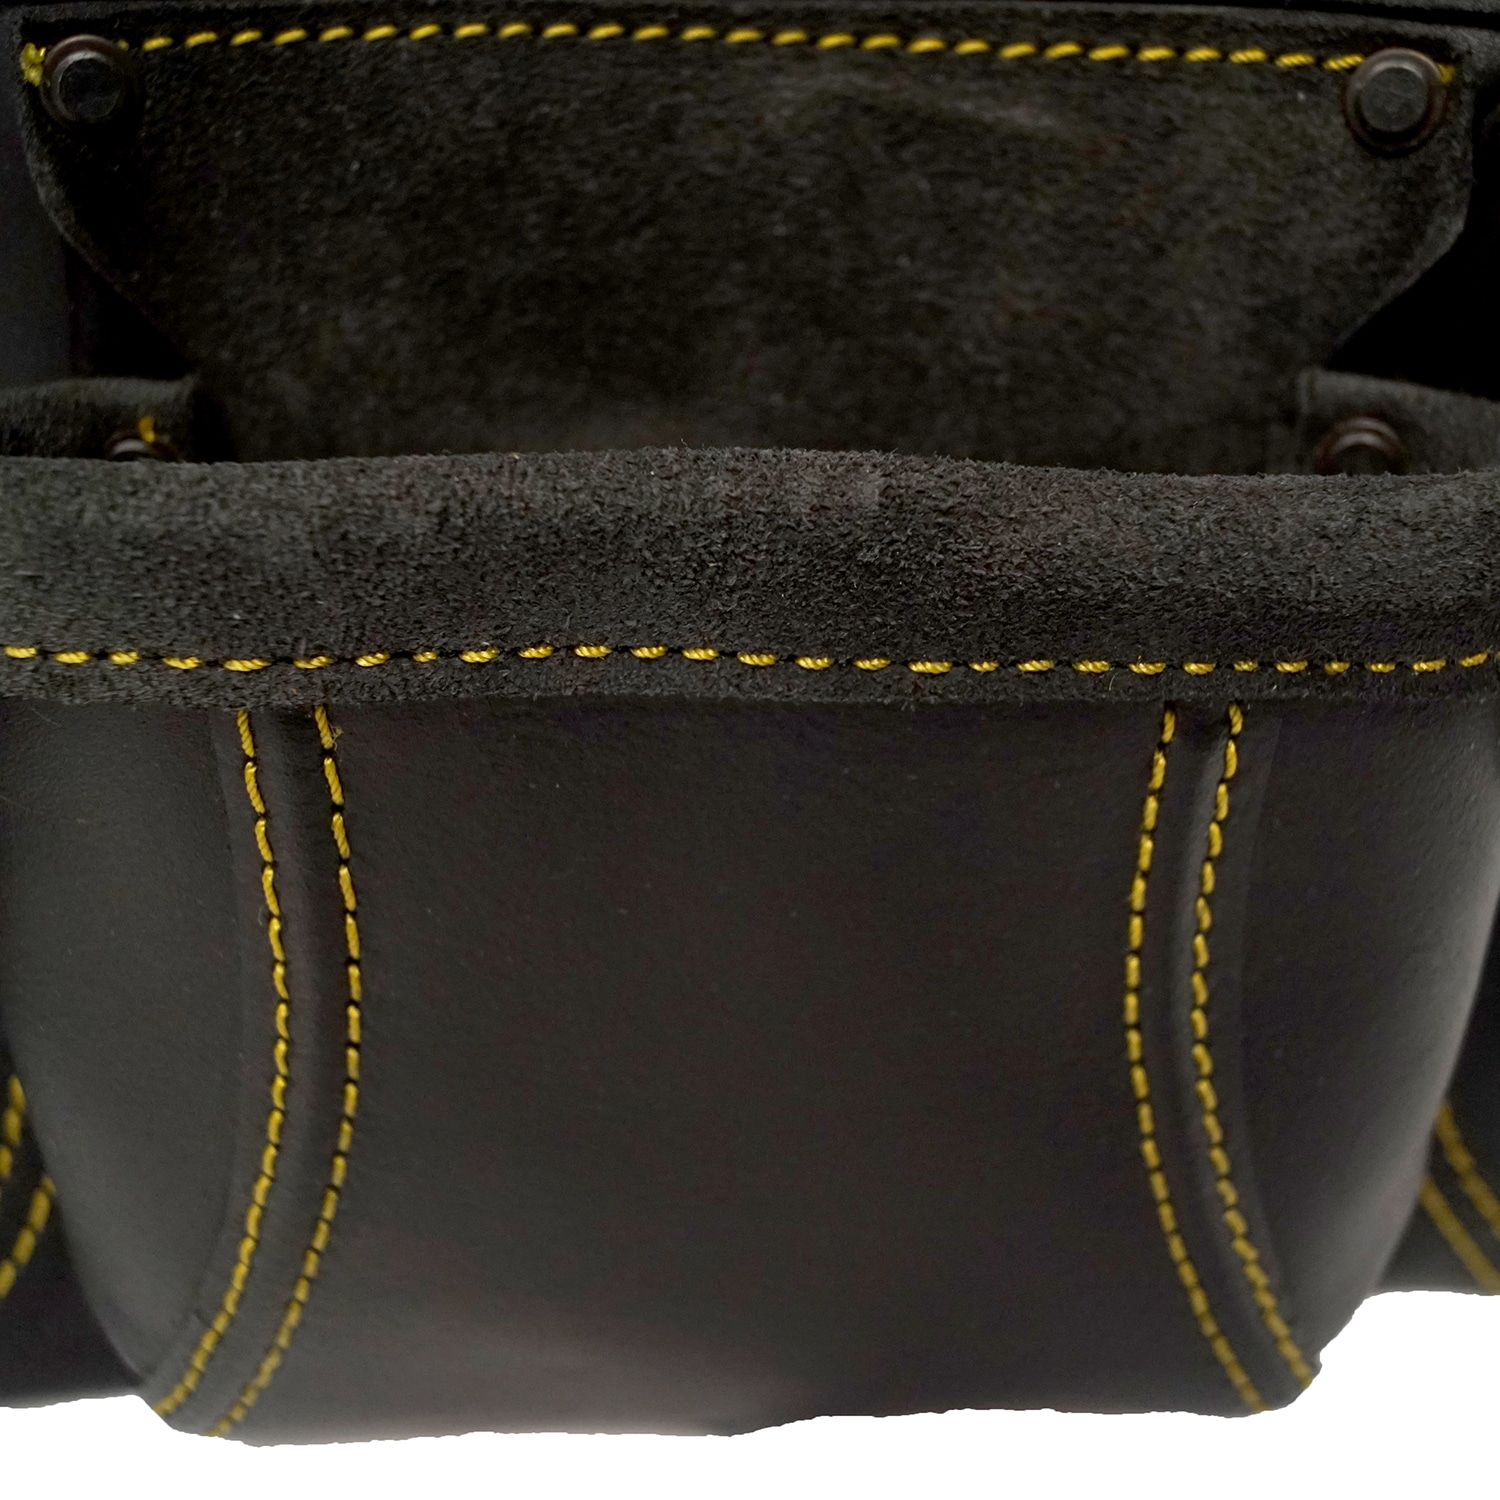 Construction Worker's Heavy-Duty Leather Nail & Tool Bag 